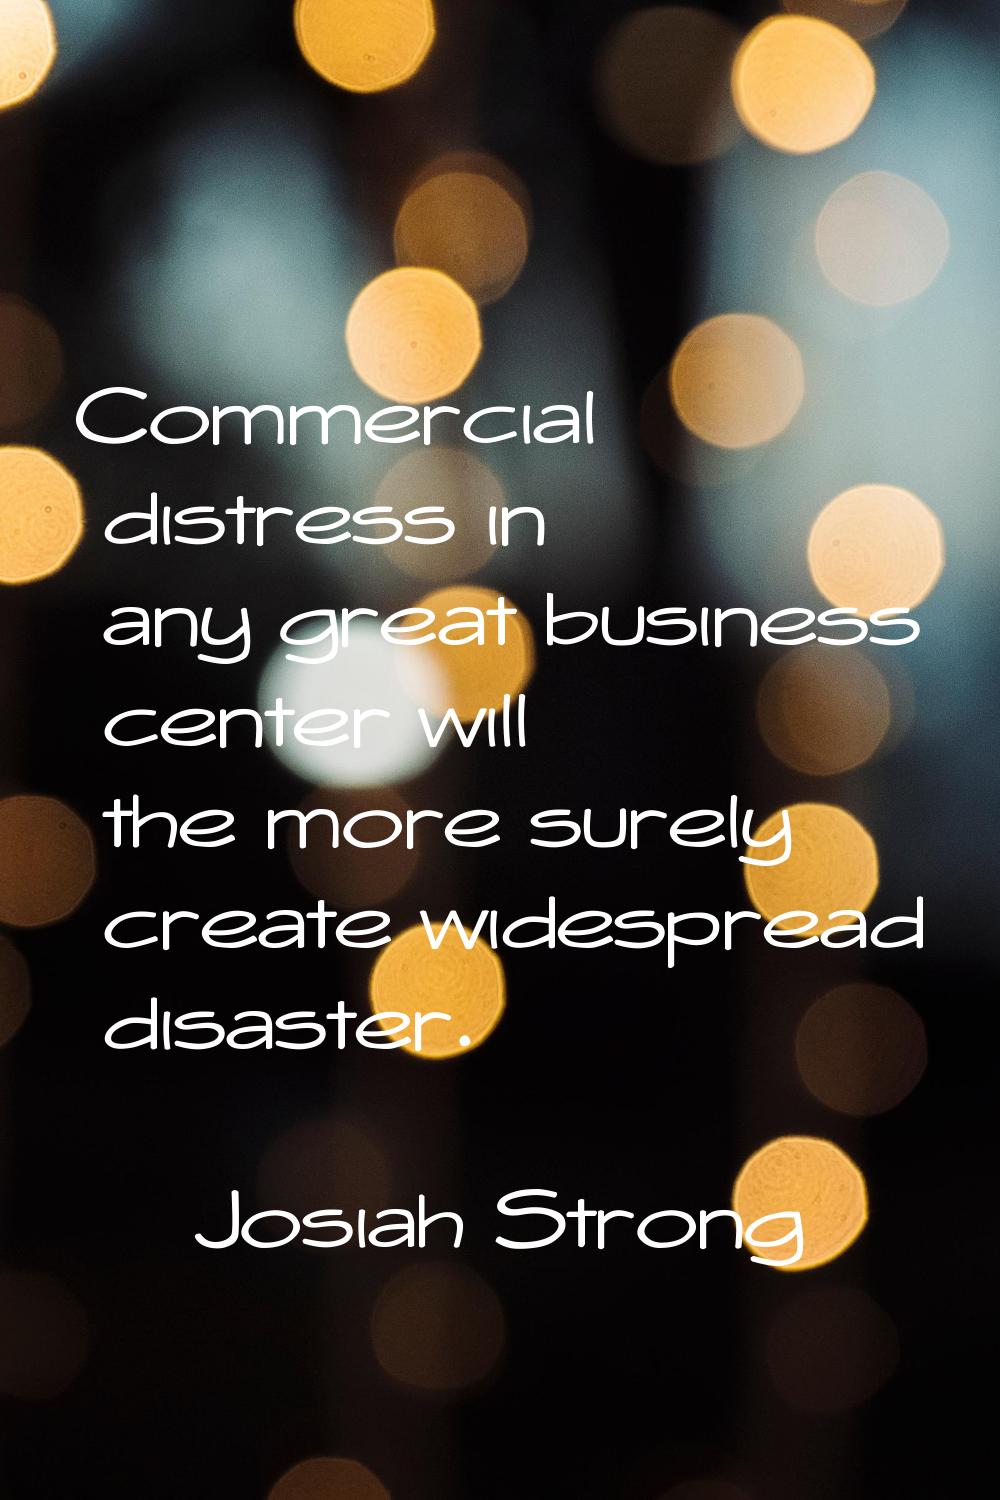 Commercial distress in any great business center will the more surely create widespread disaster.